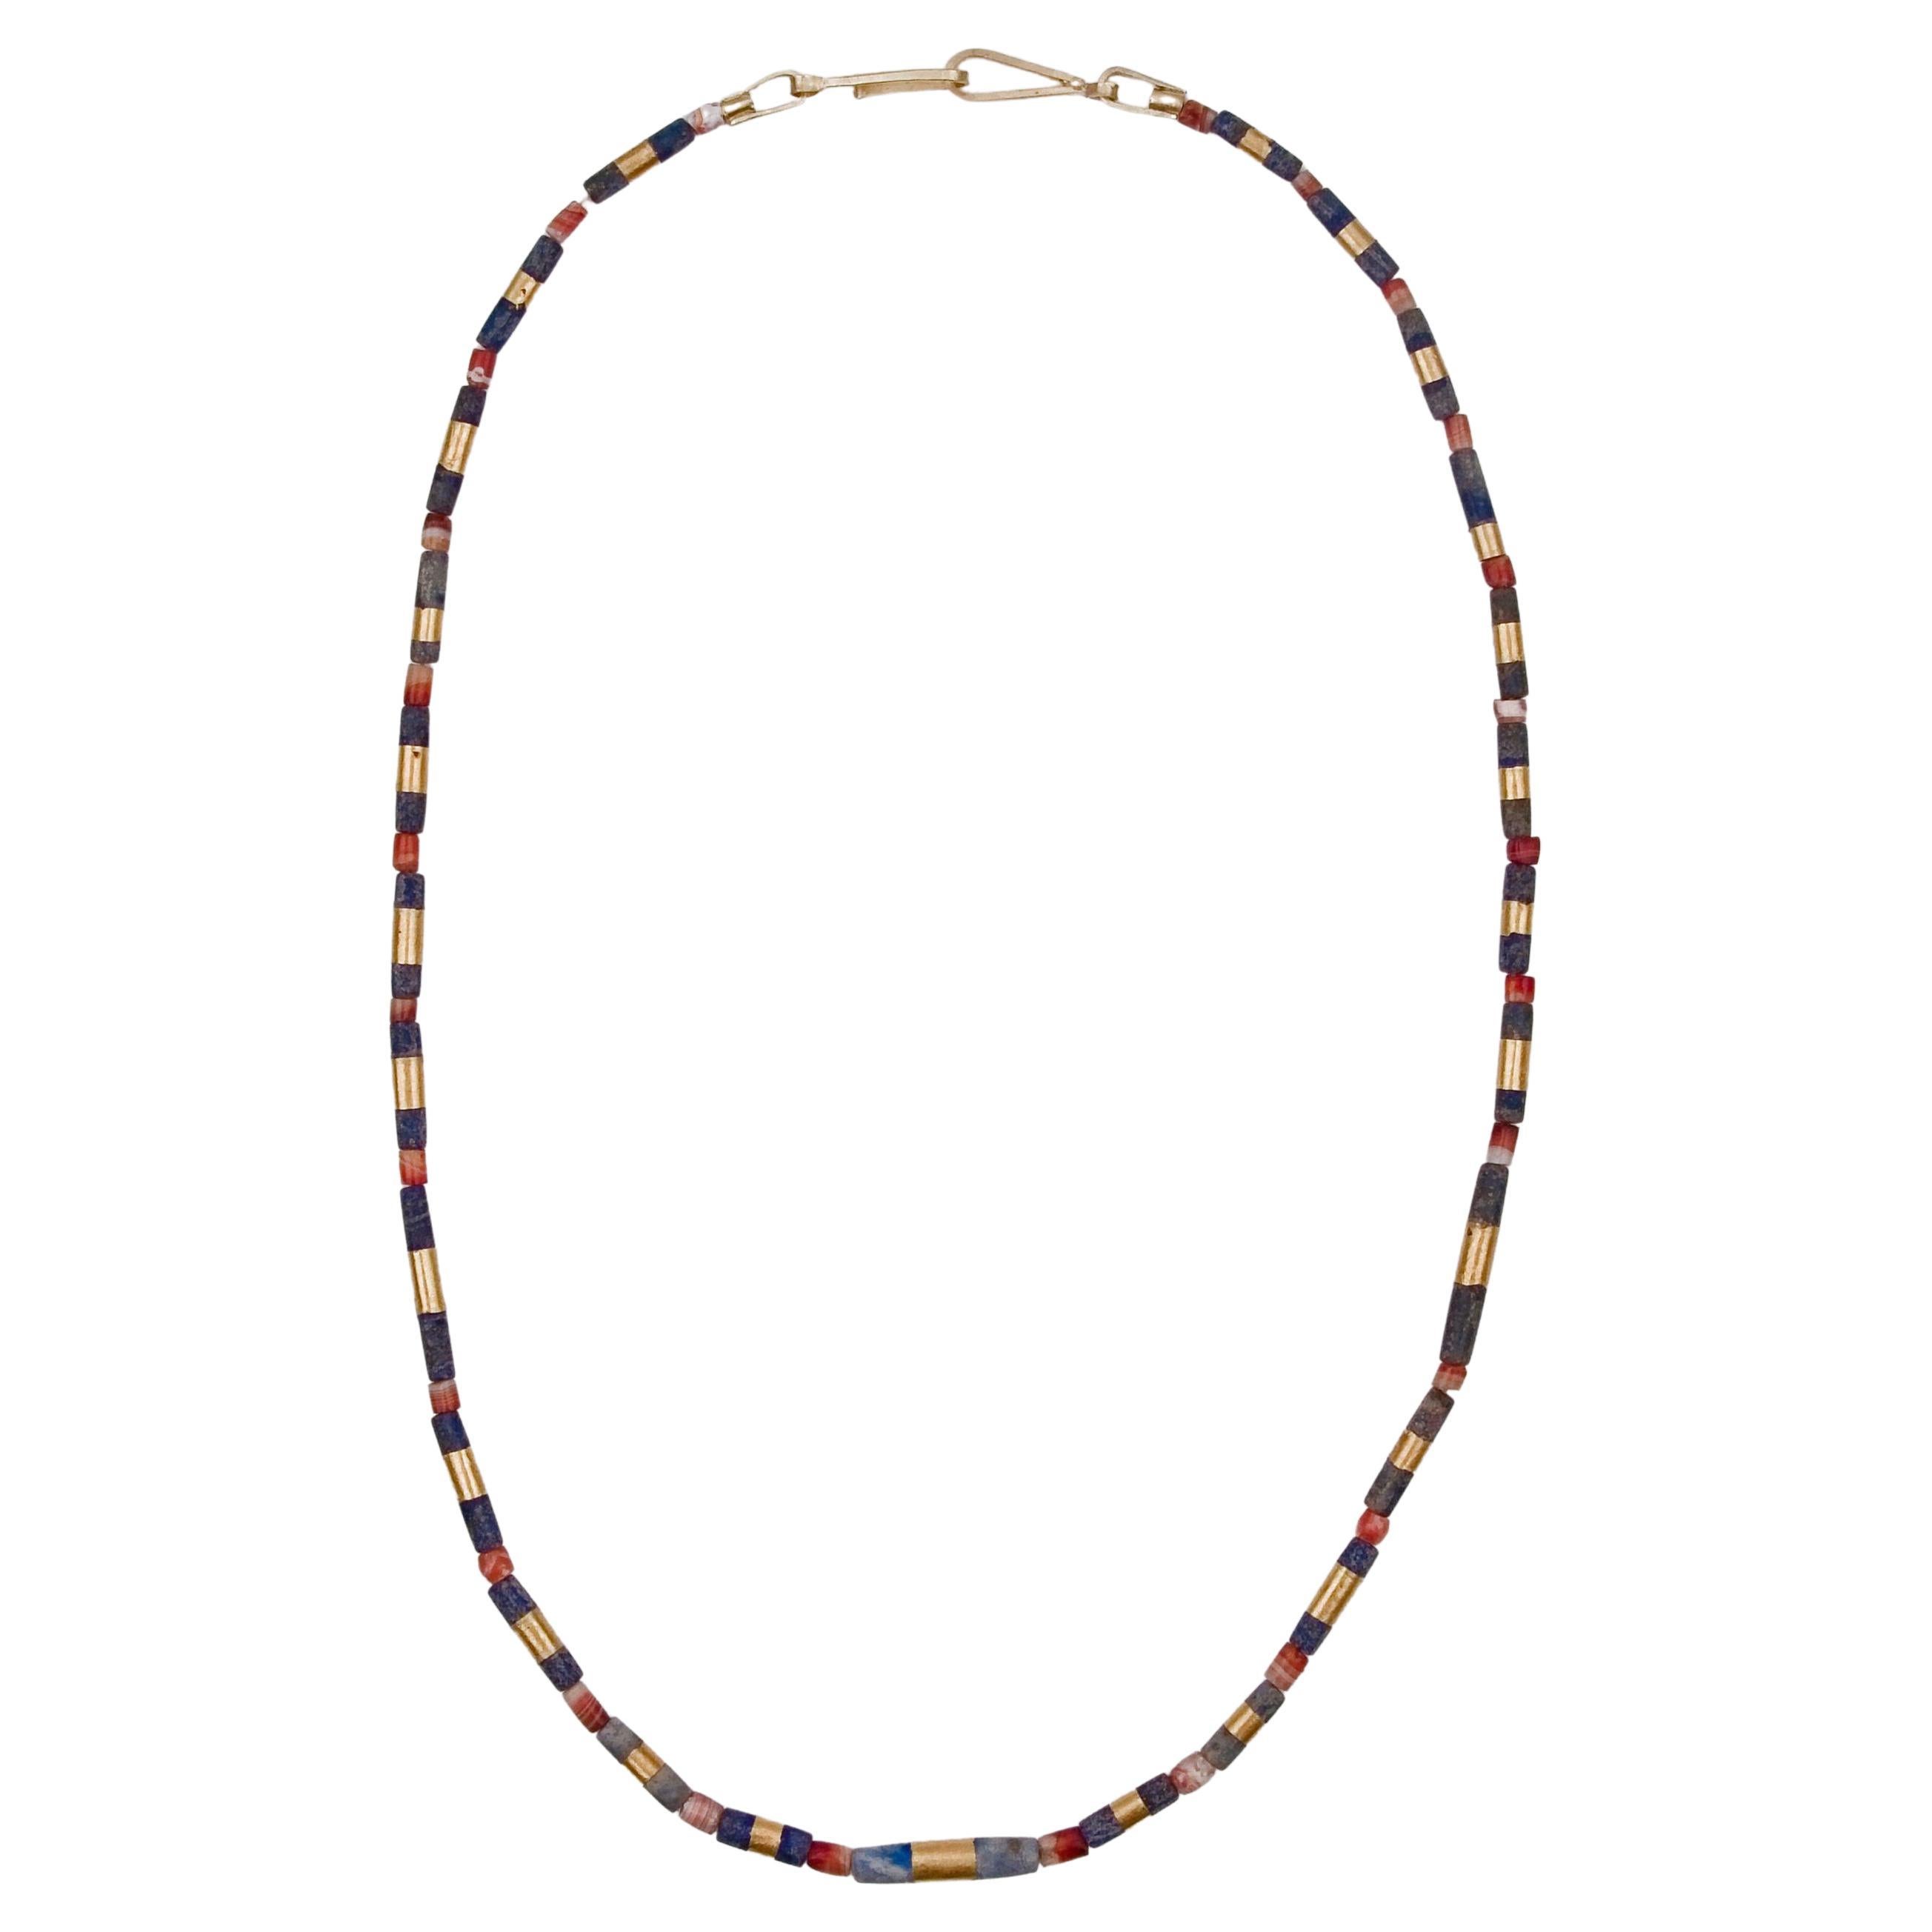 Ancient Lapis Lazuli Cylinder Beads with Custom 22k Gold Bands and Carnelian For Sale